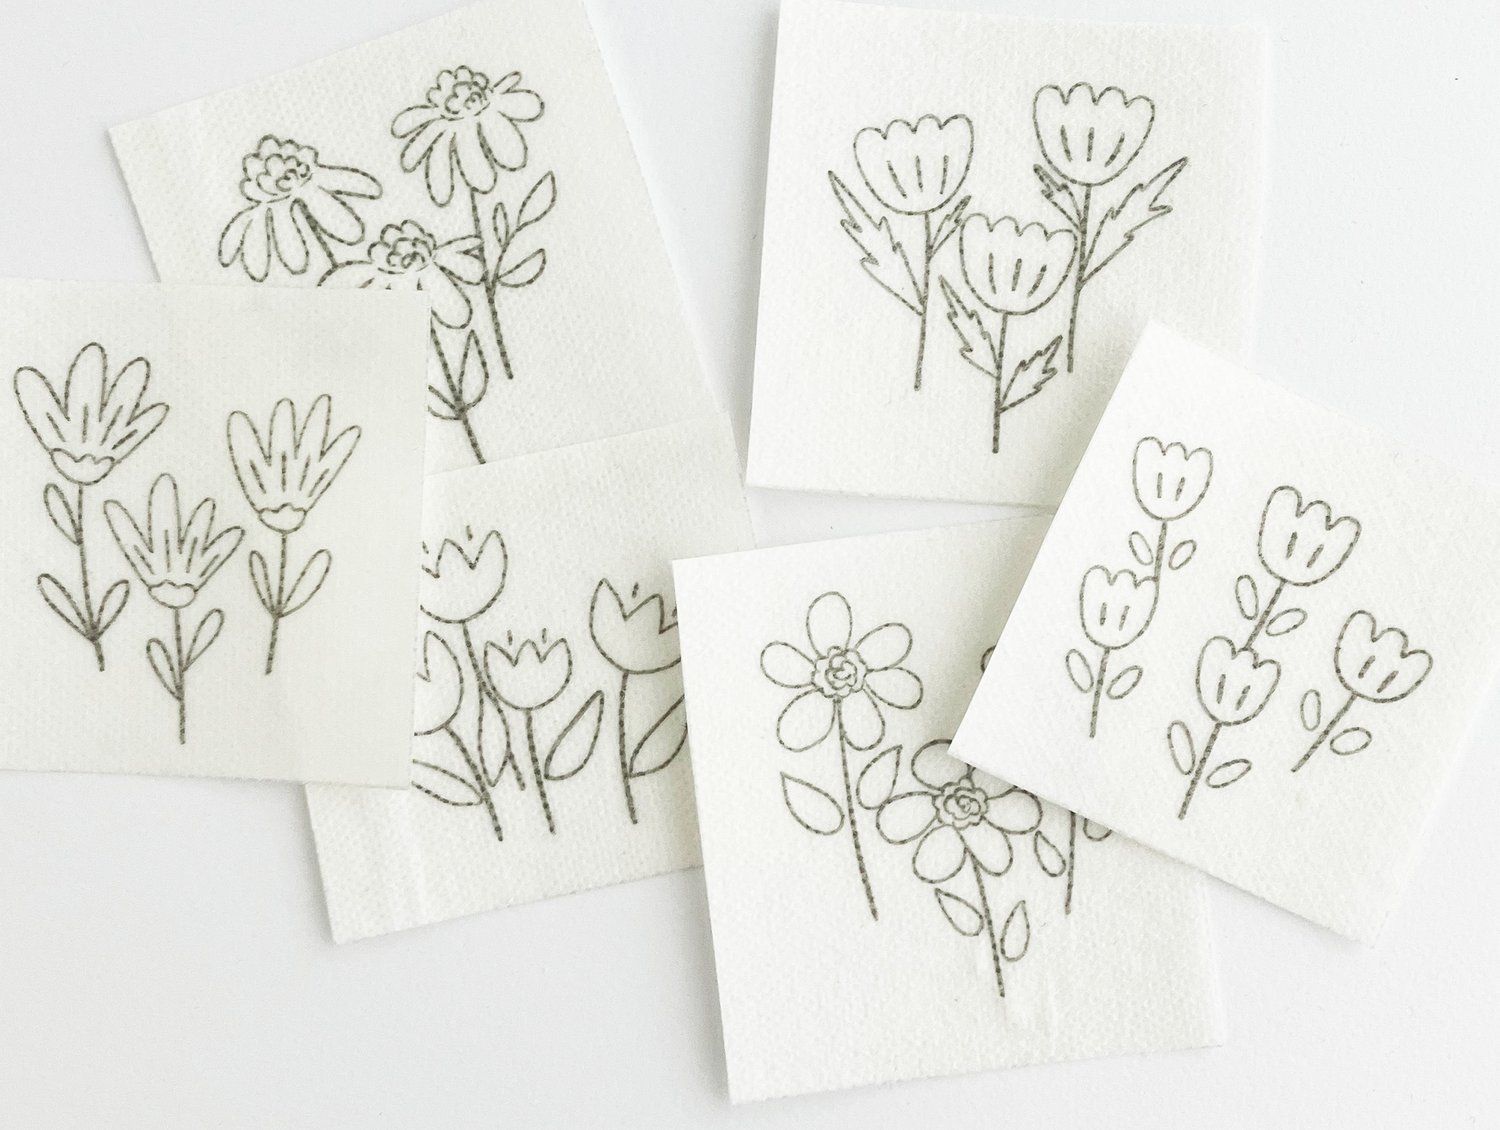 Collection of small wildflower designs on water soluble adhesive